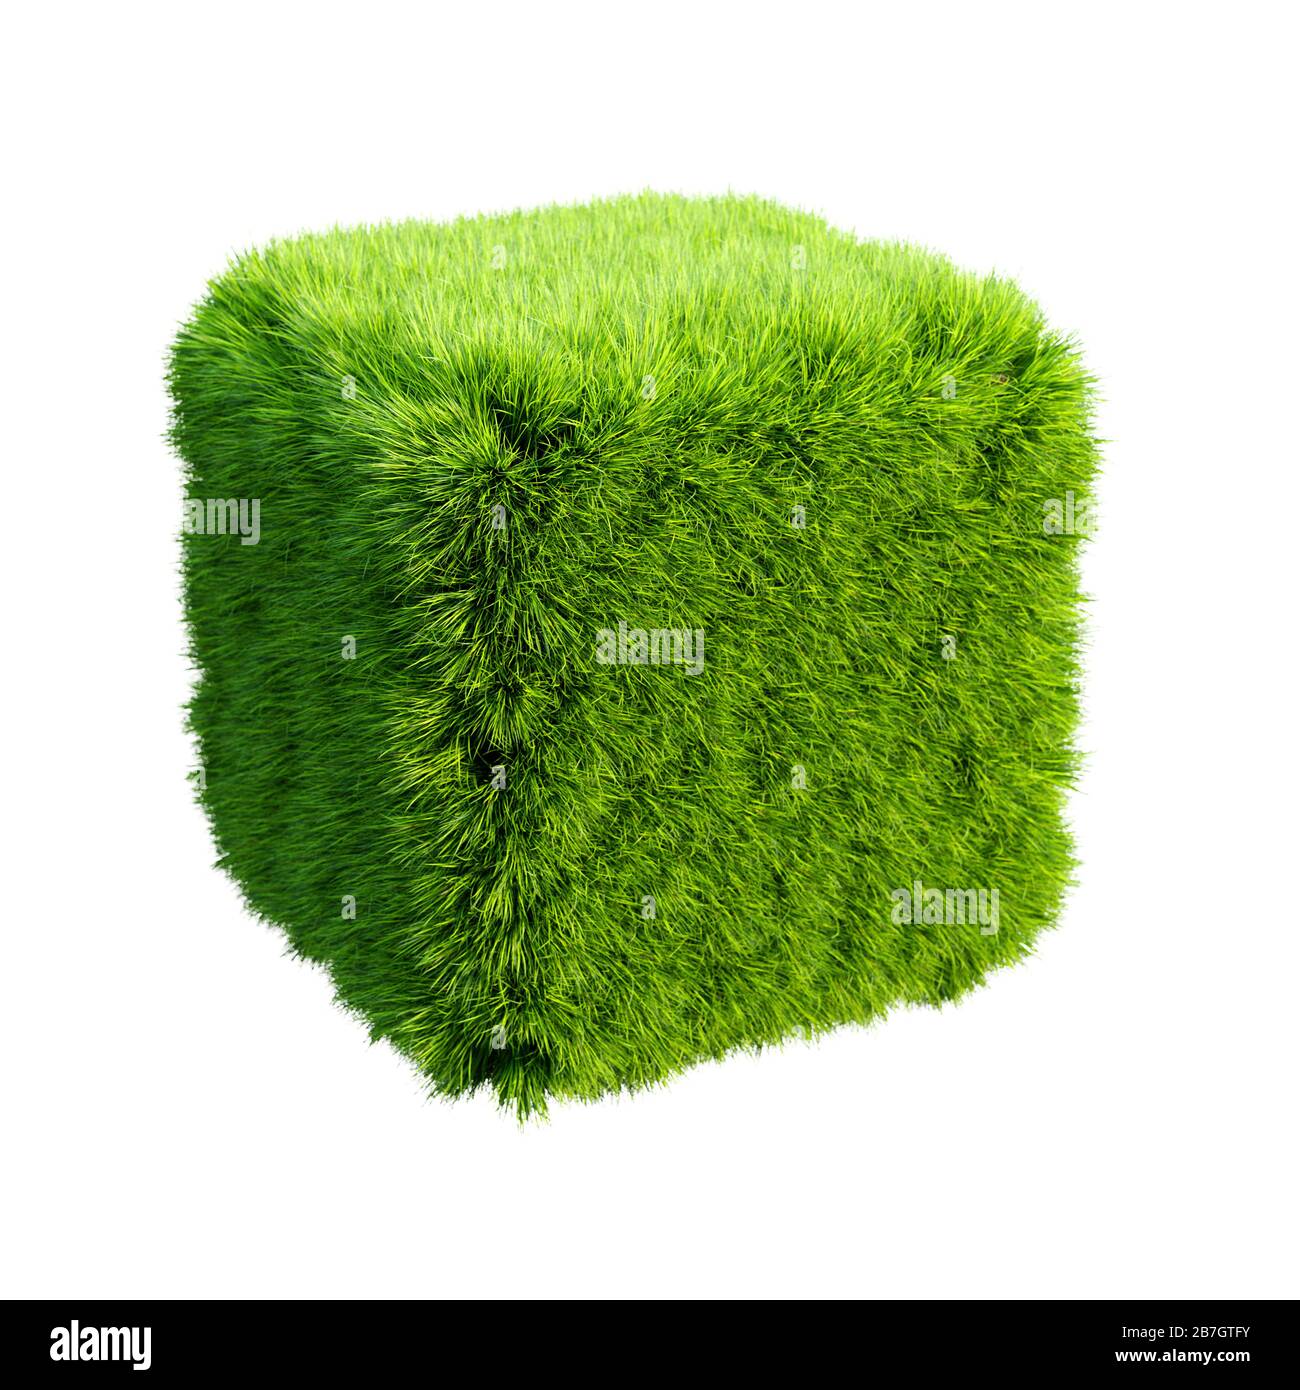 Grass cube isolated. 3d rendering illustration Stock Photo